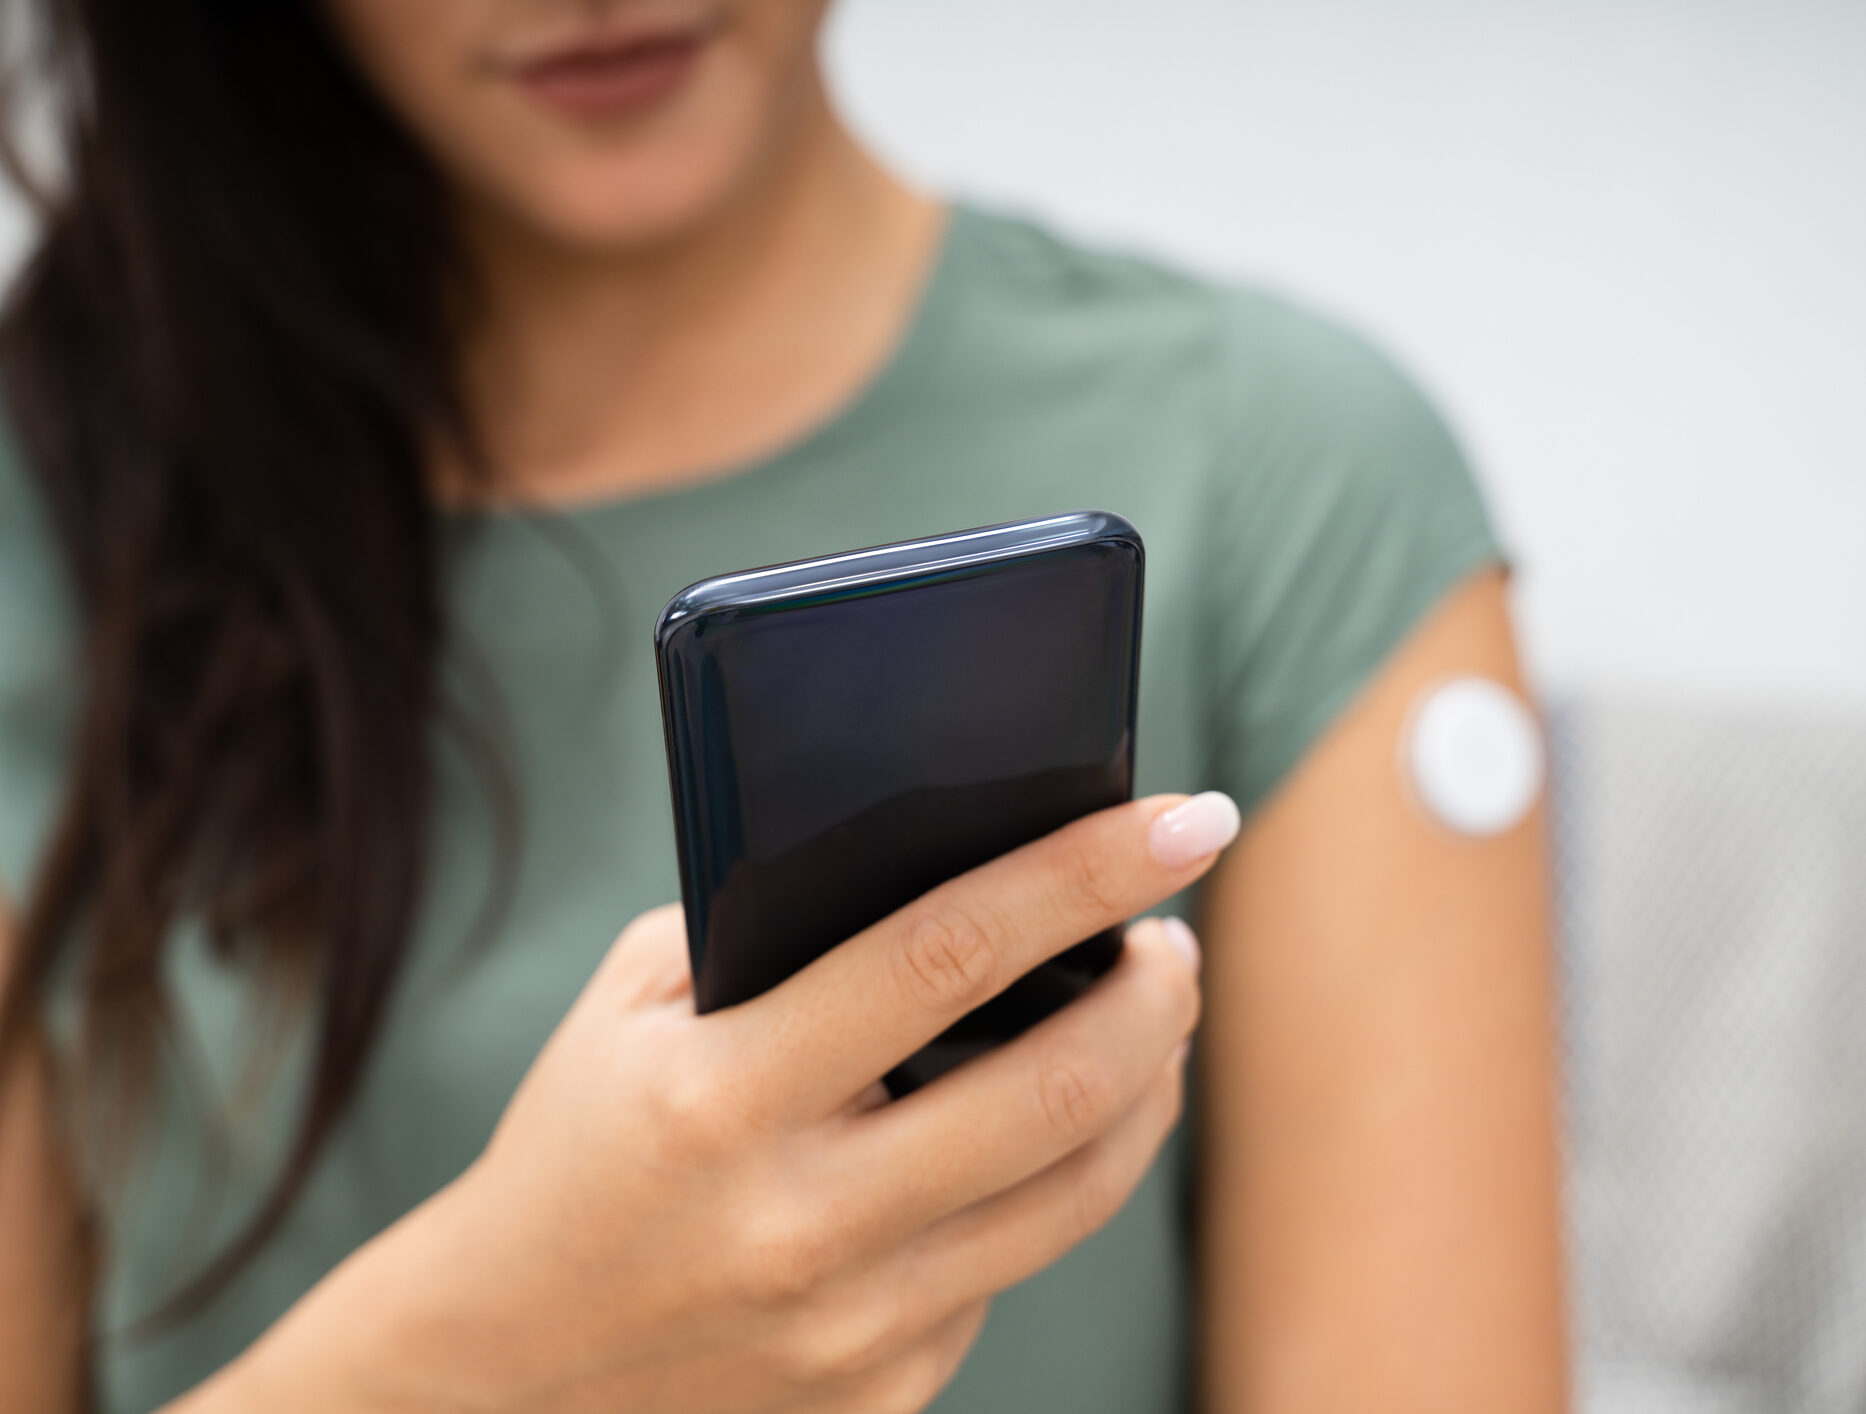 Image shows a woman holding a cellphone while she tracks her blood sugar with her glucose monitor on her arm